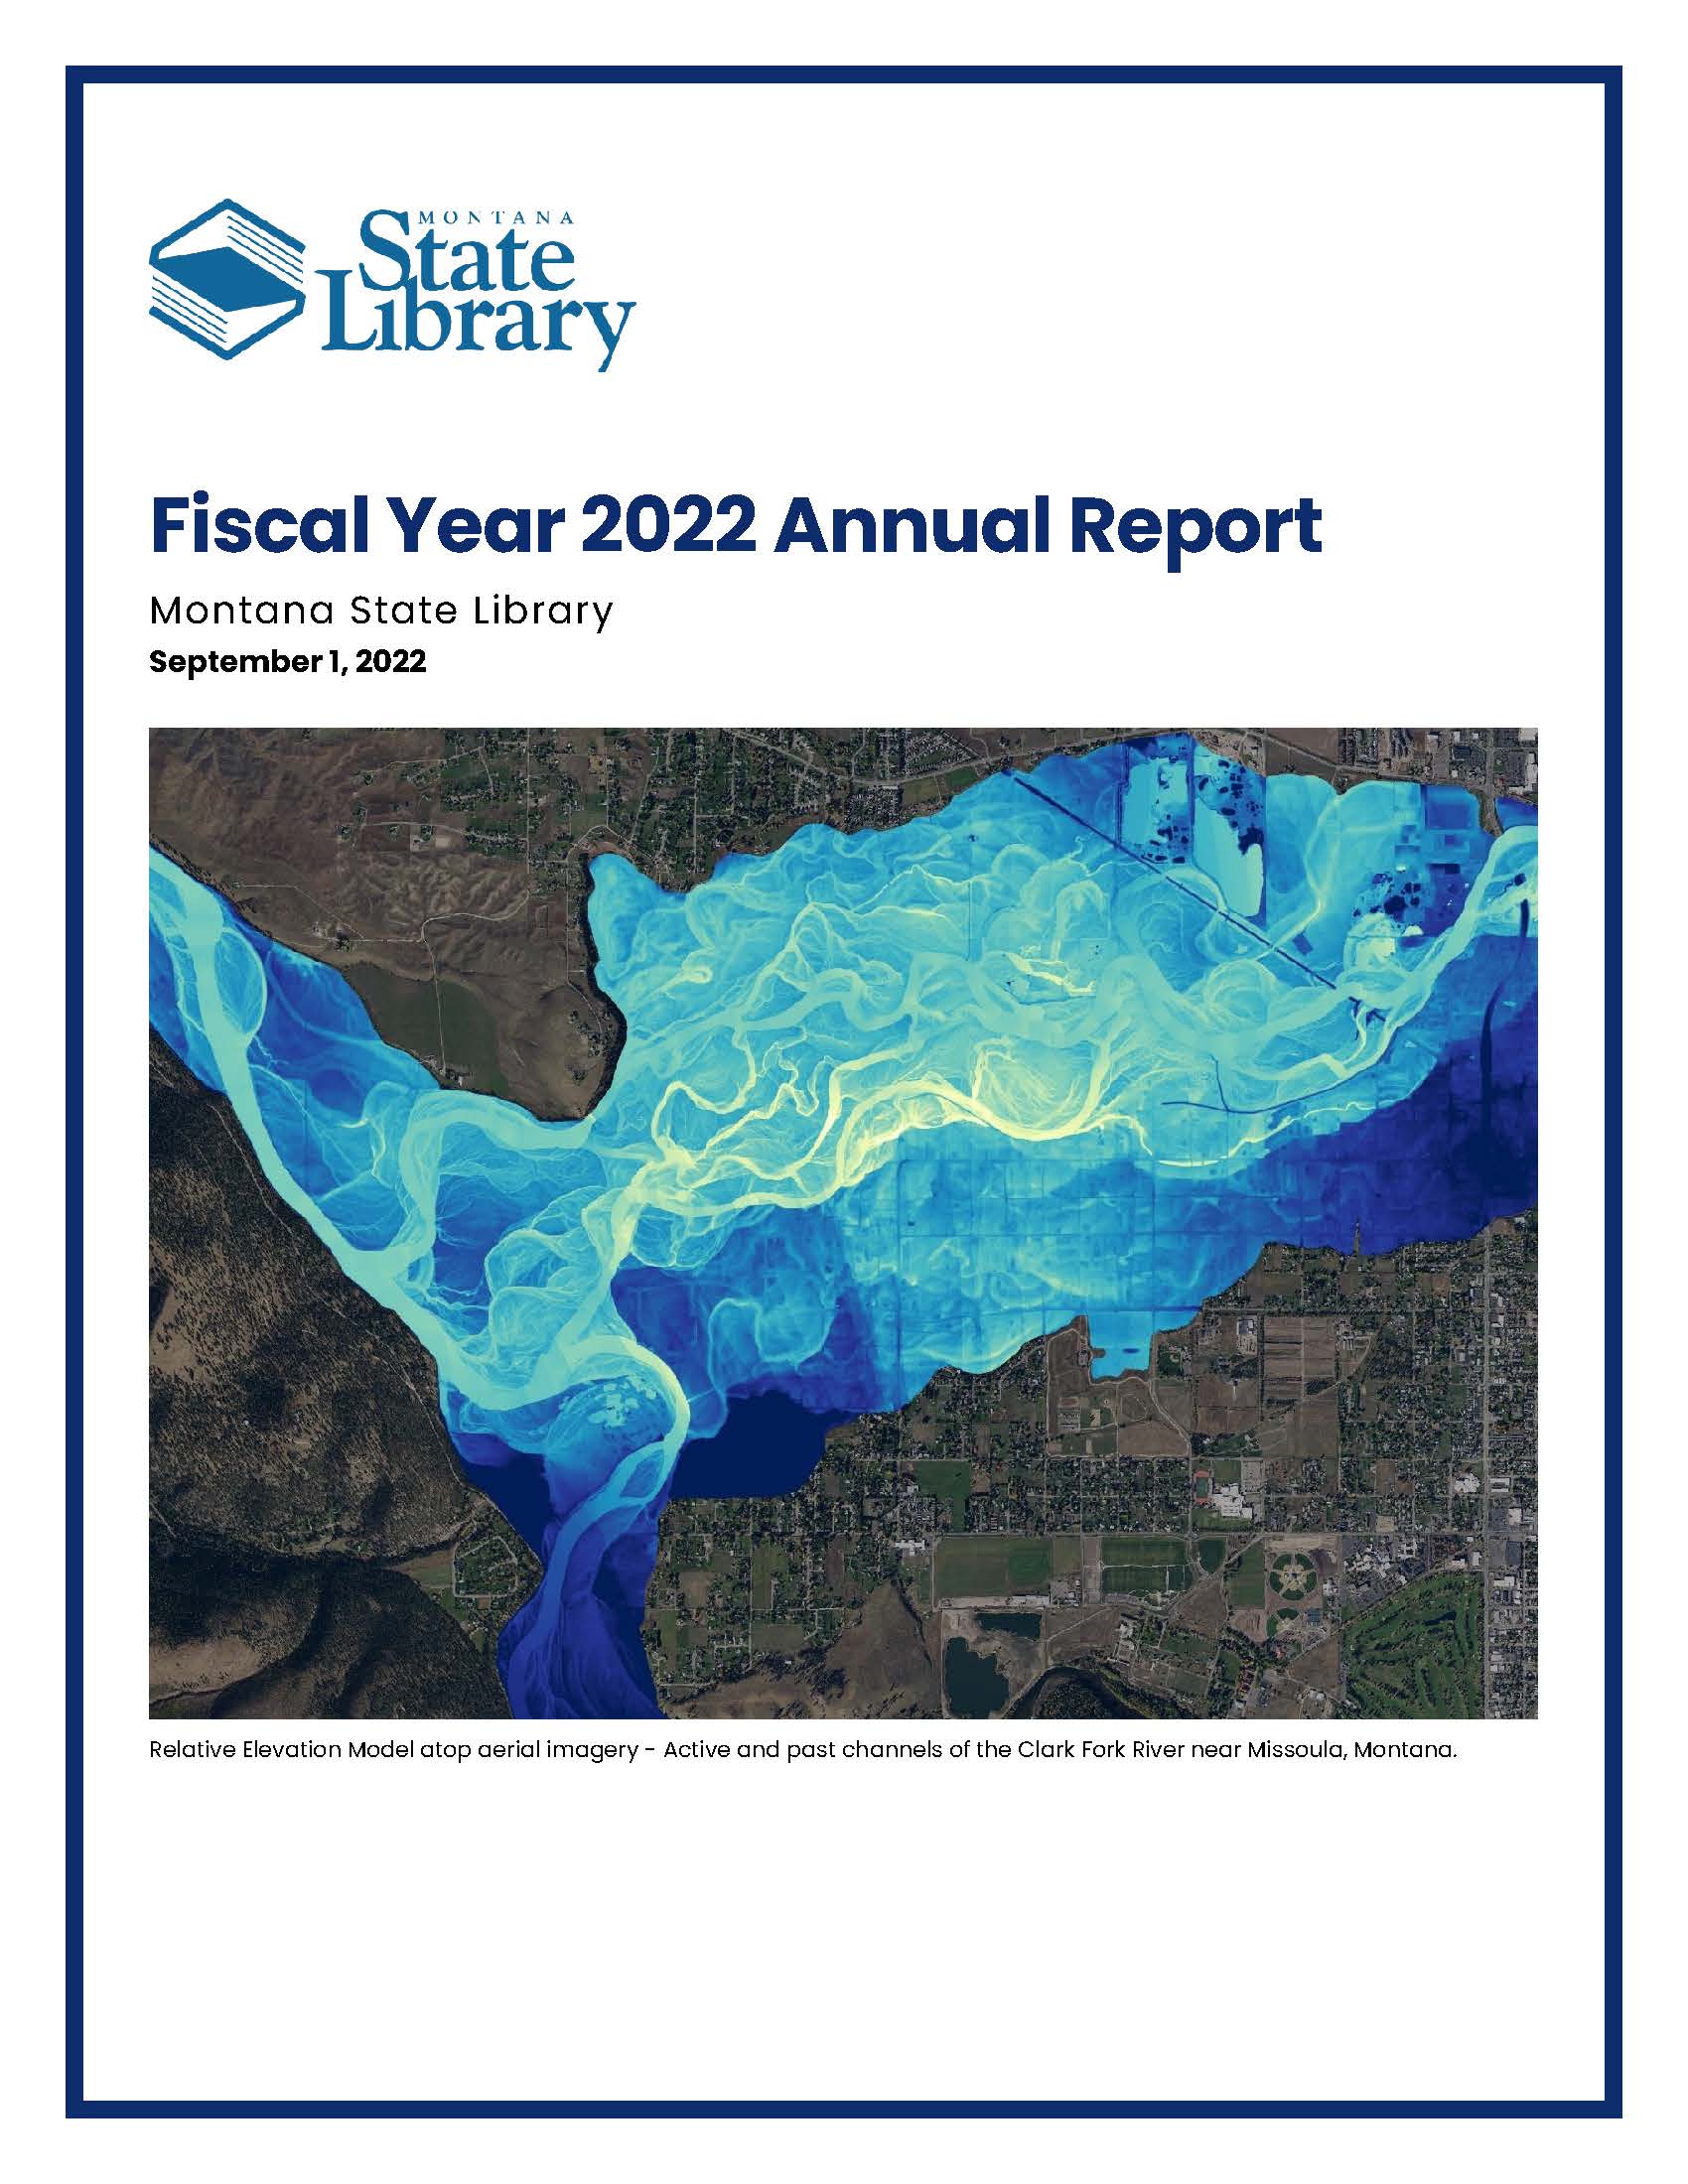 MSL Annual Report FY 22 report cover